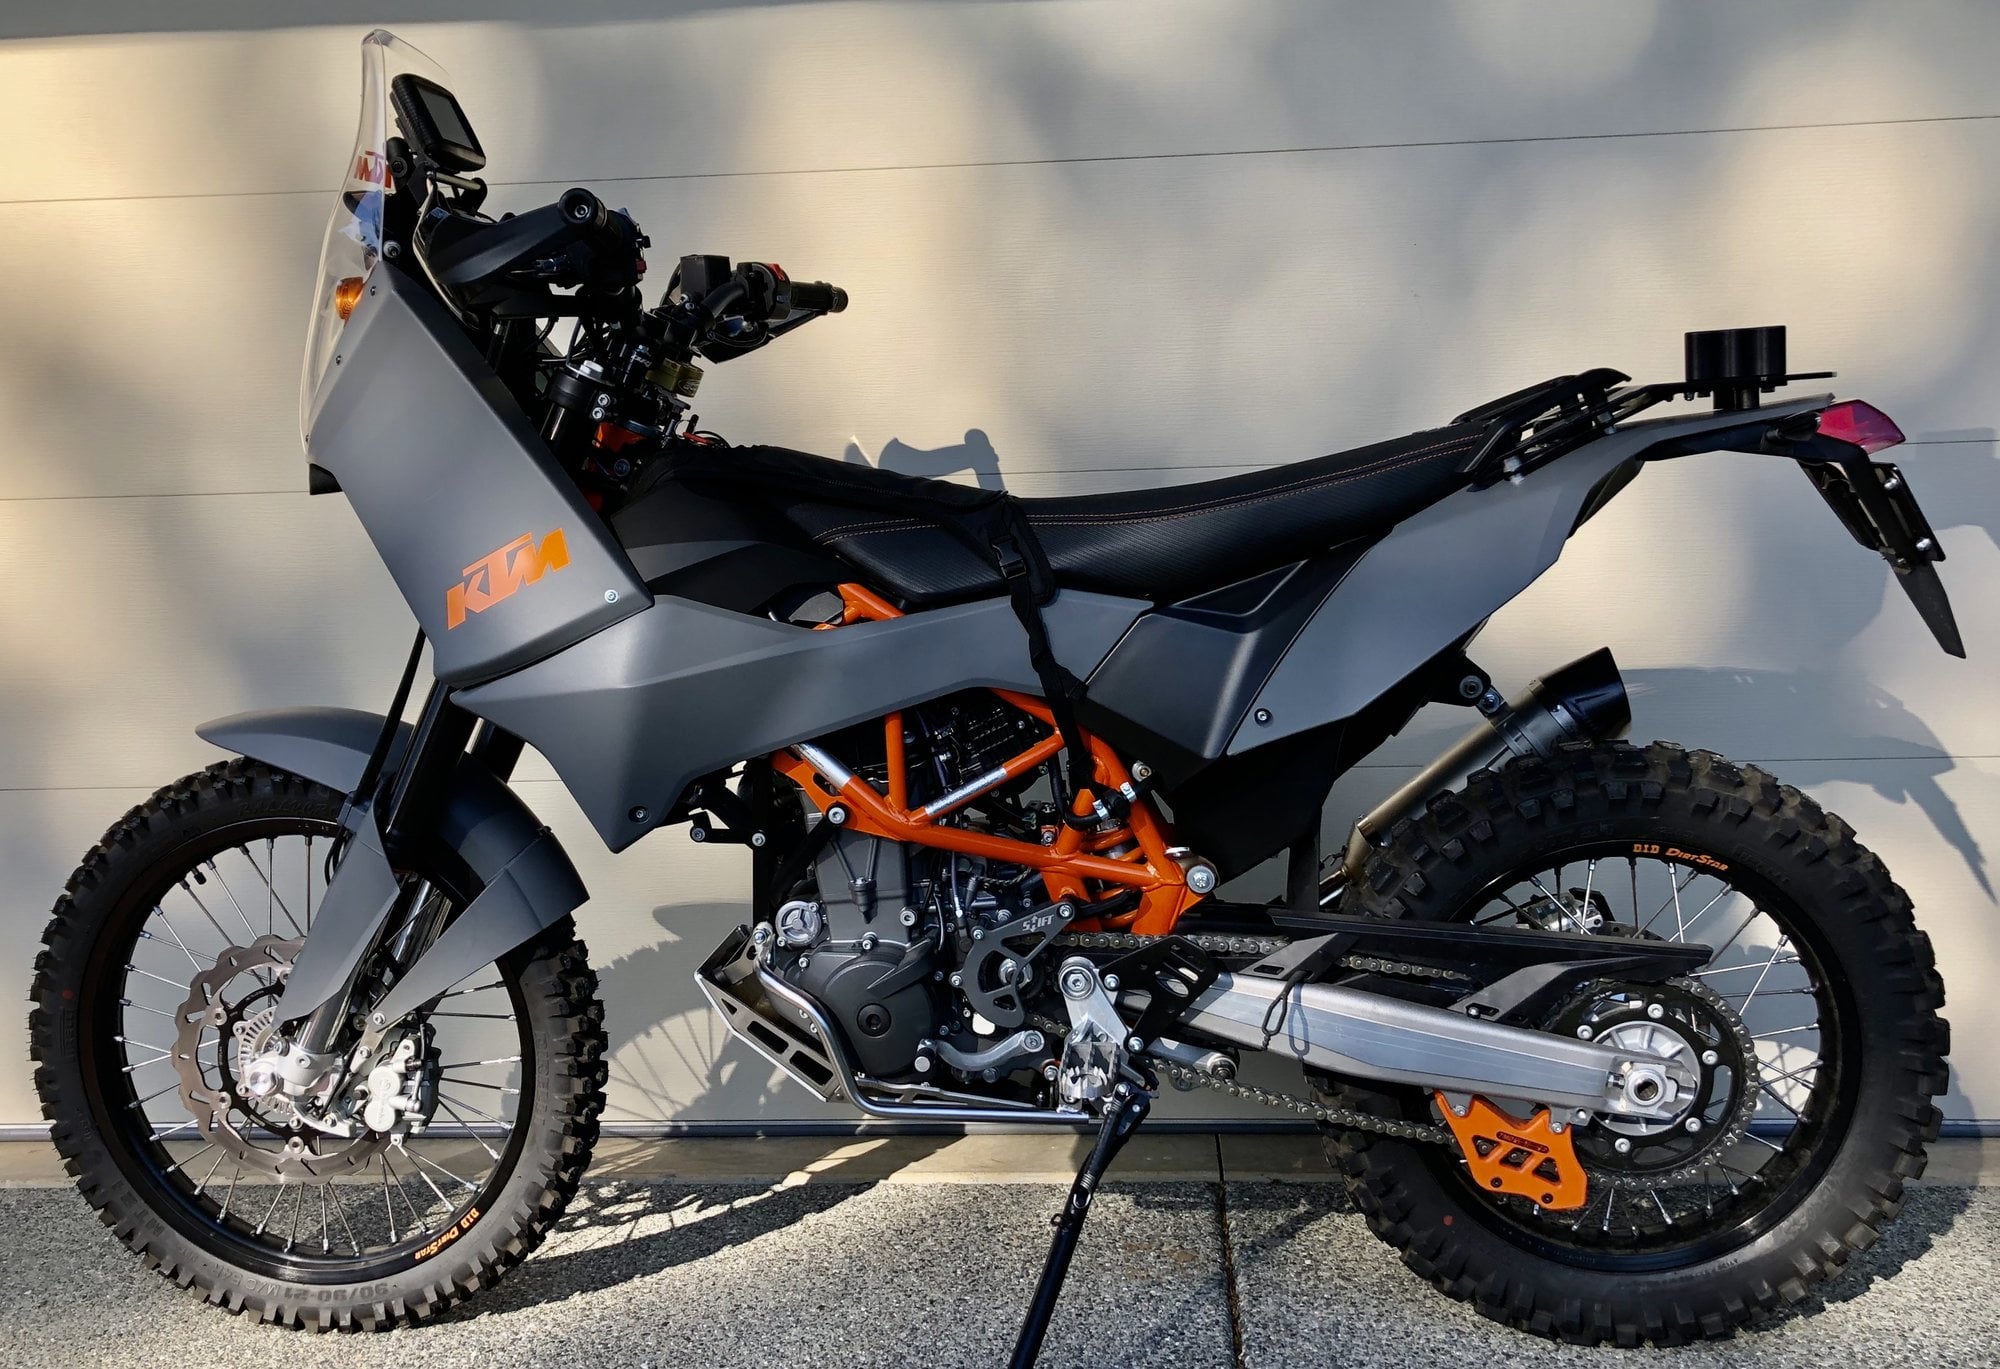 4 Sale / 2017 KTM 690 Enduro A bike that can be built into anything